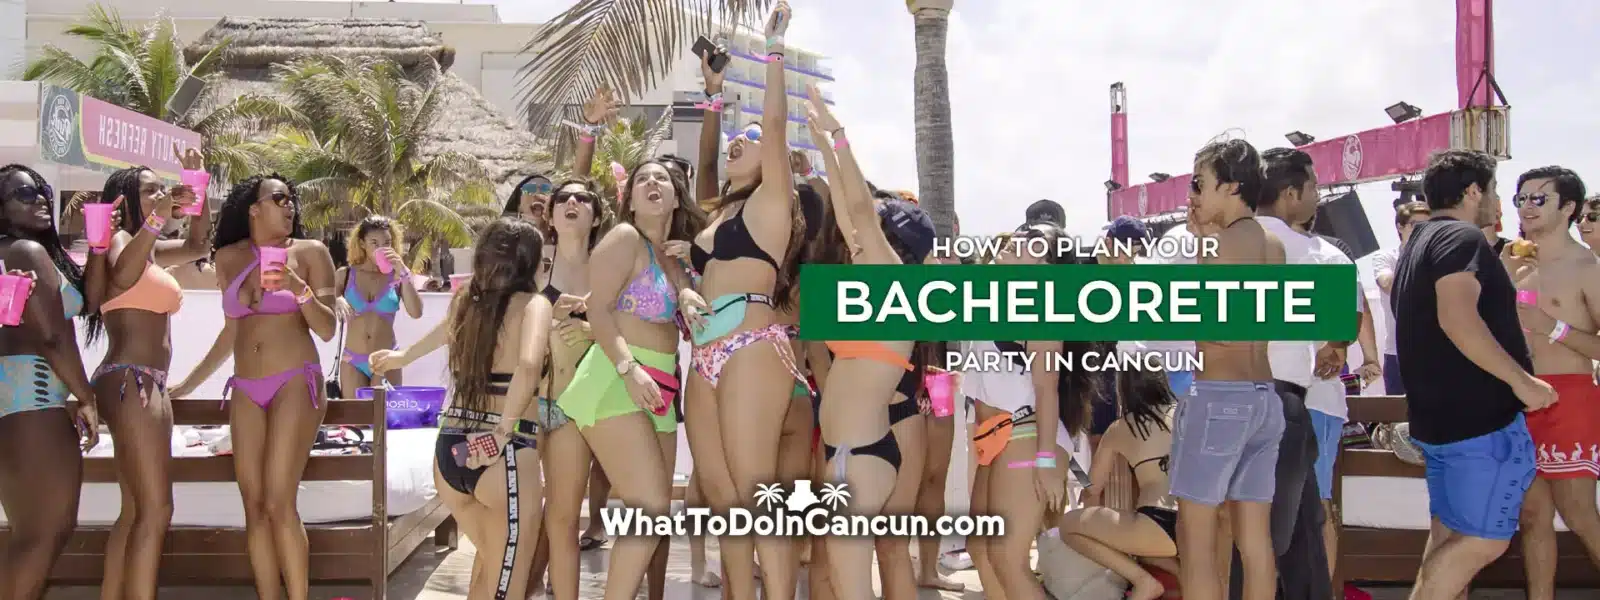 how-to-plan-your-bachelorette-cancun-party